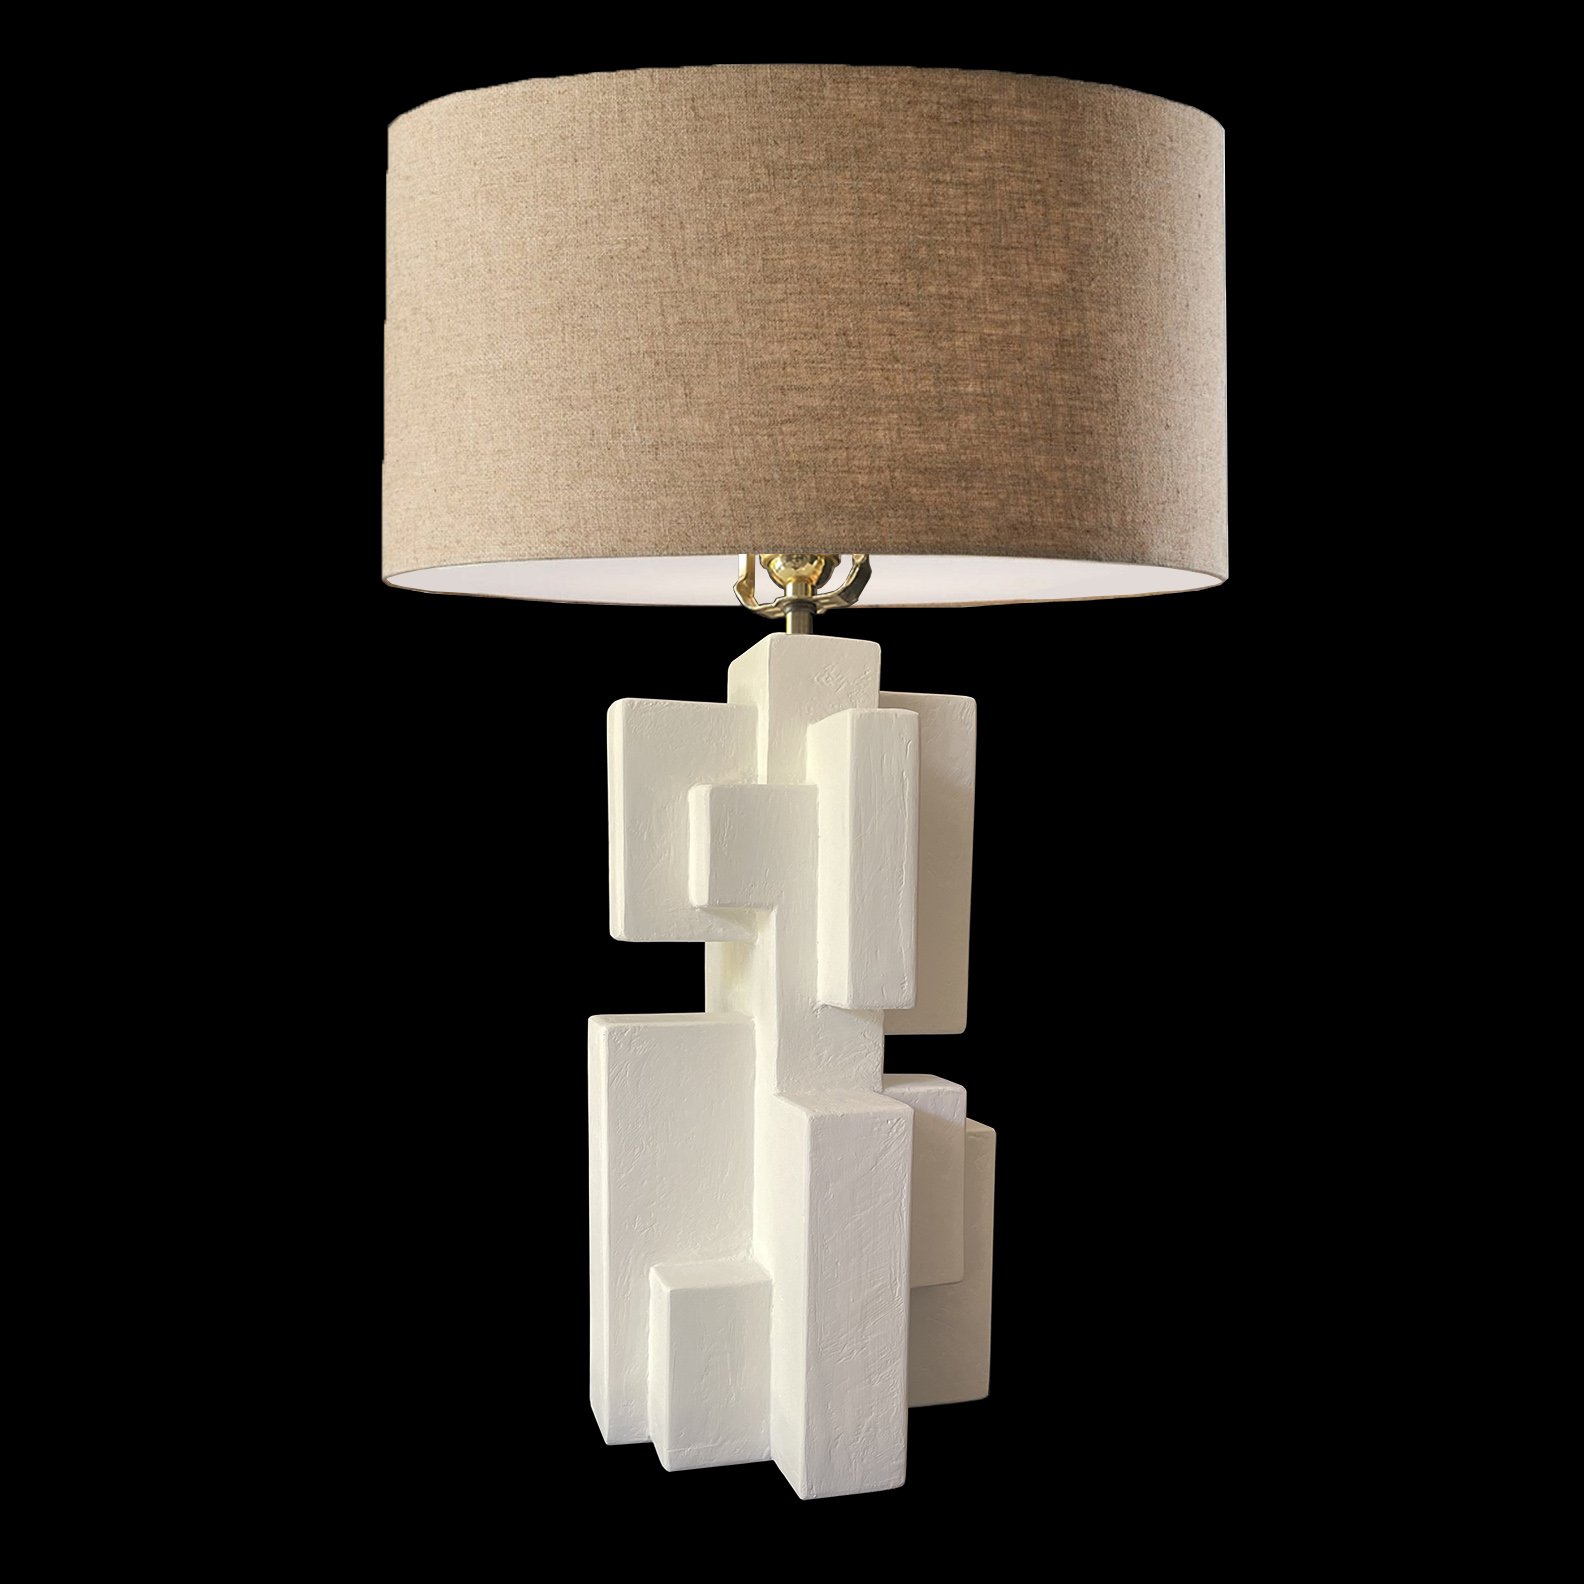 PABLO TABLE LAMP, 17.5" tall, 2023